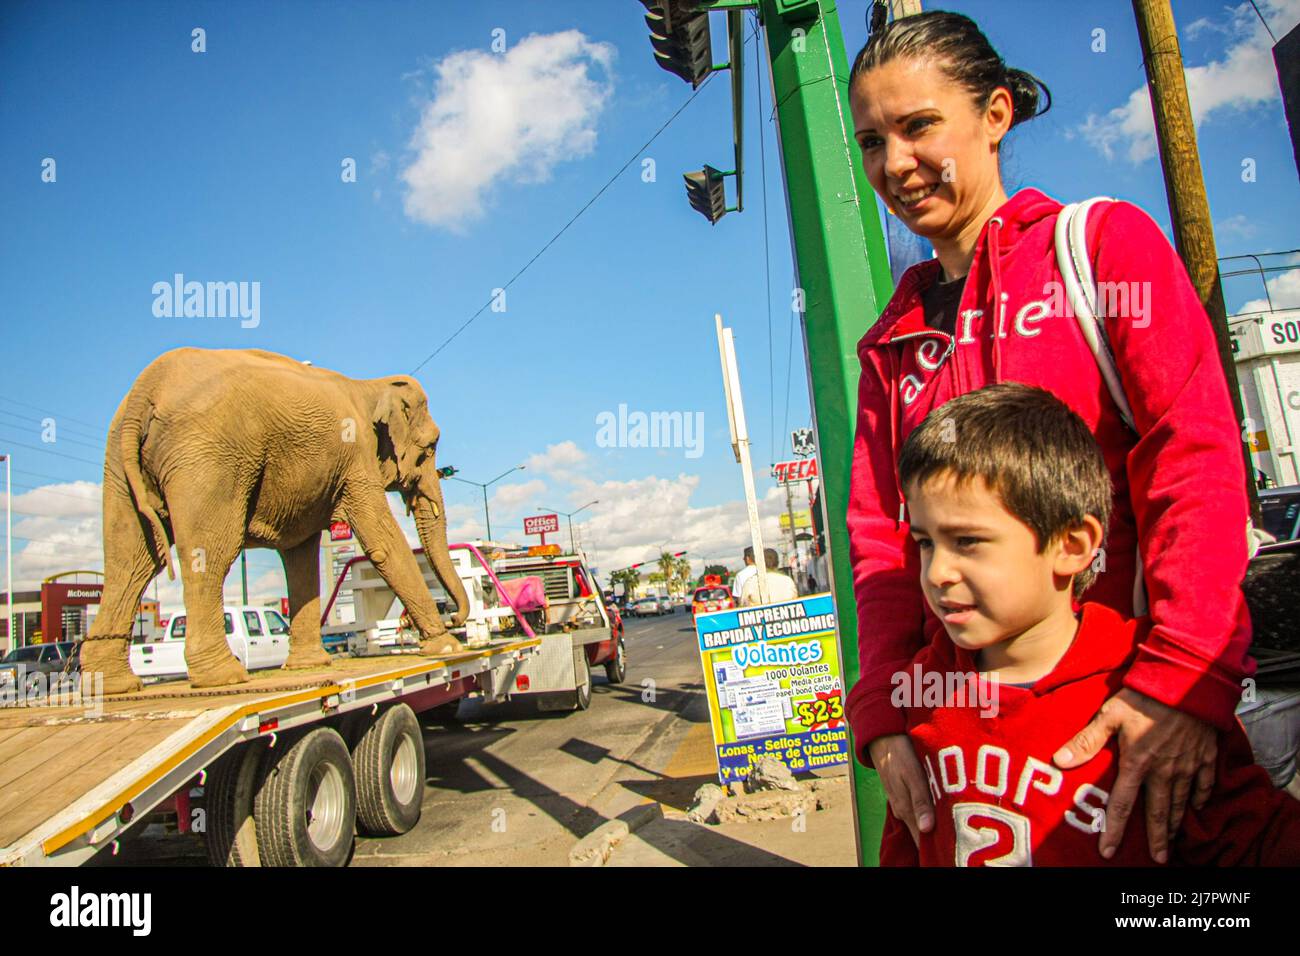 A large elephant, a tiger, a hippopotamus and a camel are paraded on a platform and cage by the Atayde circus in the city on December 23, 2010 in Hermosillo Mexico. Colosio Boulevard and Fifth Mayor. animals subdued, domesticated and turned into puppets for human entertainment. The circus is itinerant, which means that animals are constantly moved, and not only from one city to another, but also from one country to another. (© Photo Luis Gutierrez by NortePhoto.com)  Un gran elefante, un tigre, Hipopótamo y un camello son paseados en una plataforna y jaula  por circo Atayde en la ciudad el 23 Stock Photo